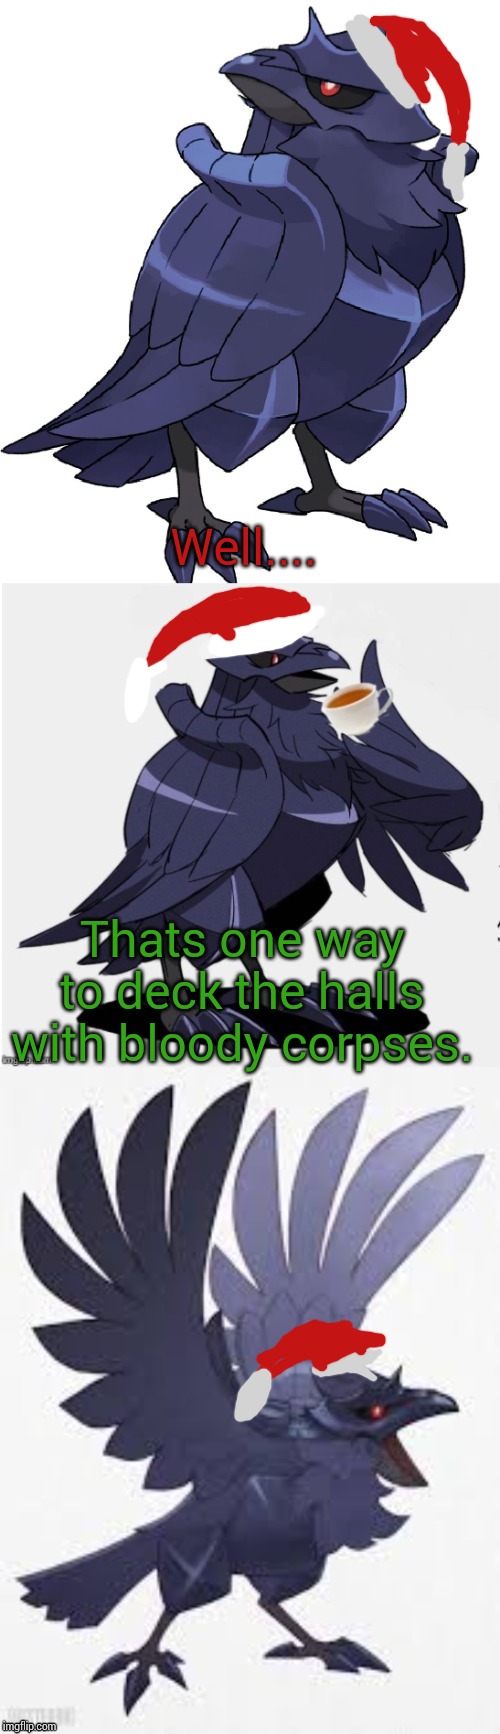 Bad Pun TTDC | Well.... Thats one way to deck the halls with bloody corpses. | image tagged in bad pun ttdc | made w/ Imgflip meme maker